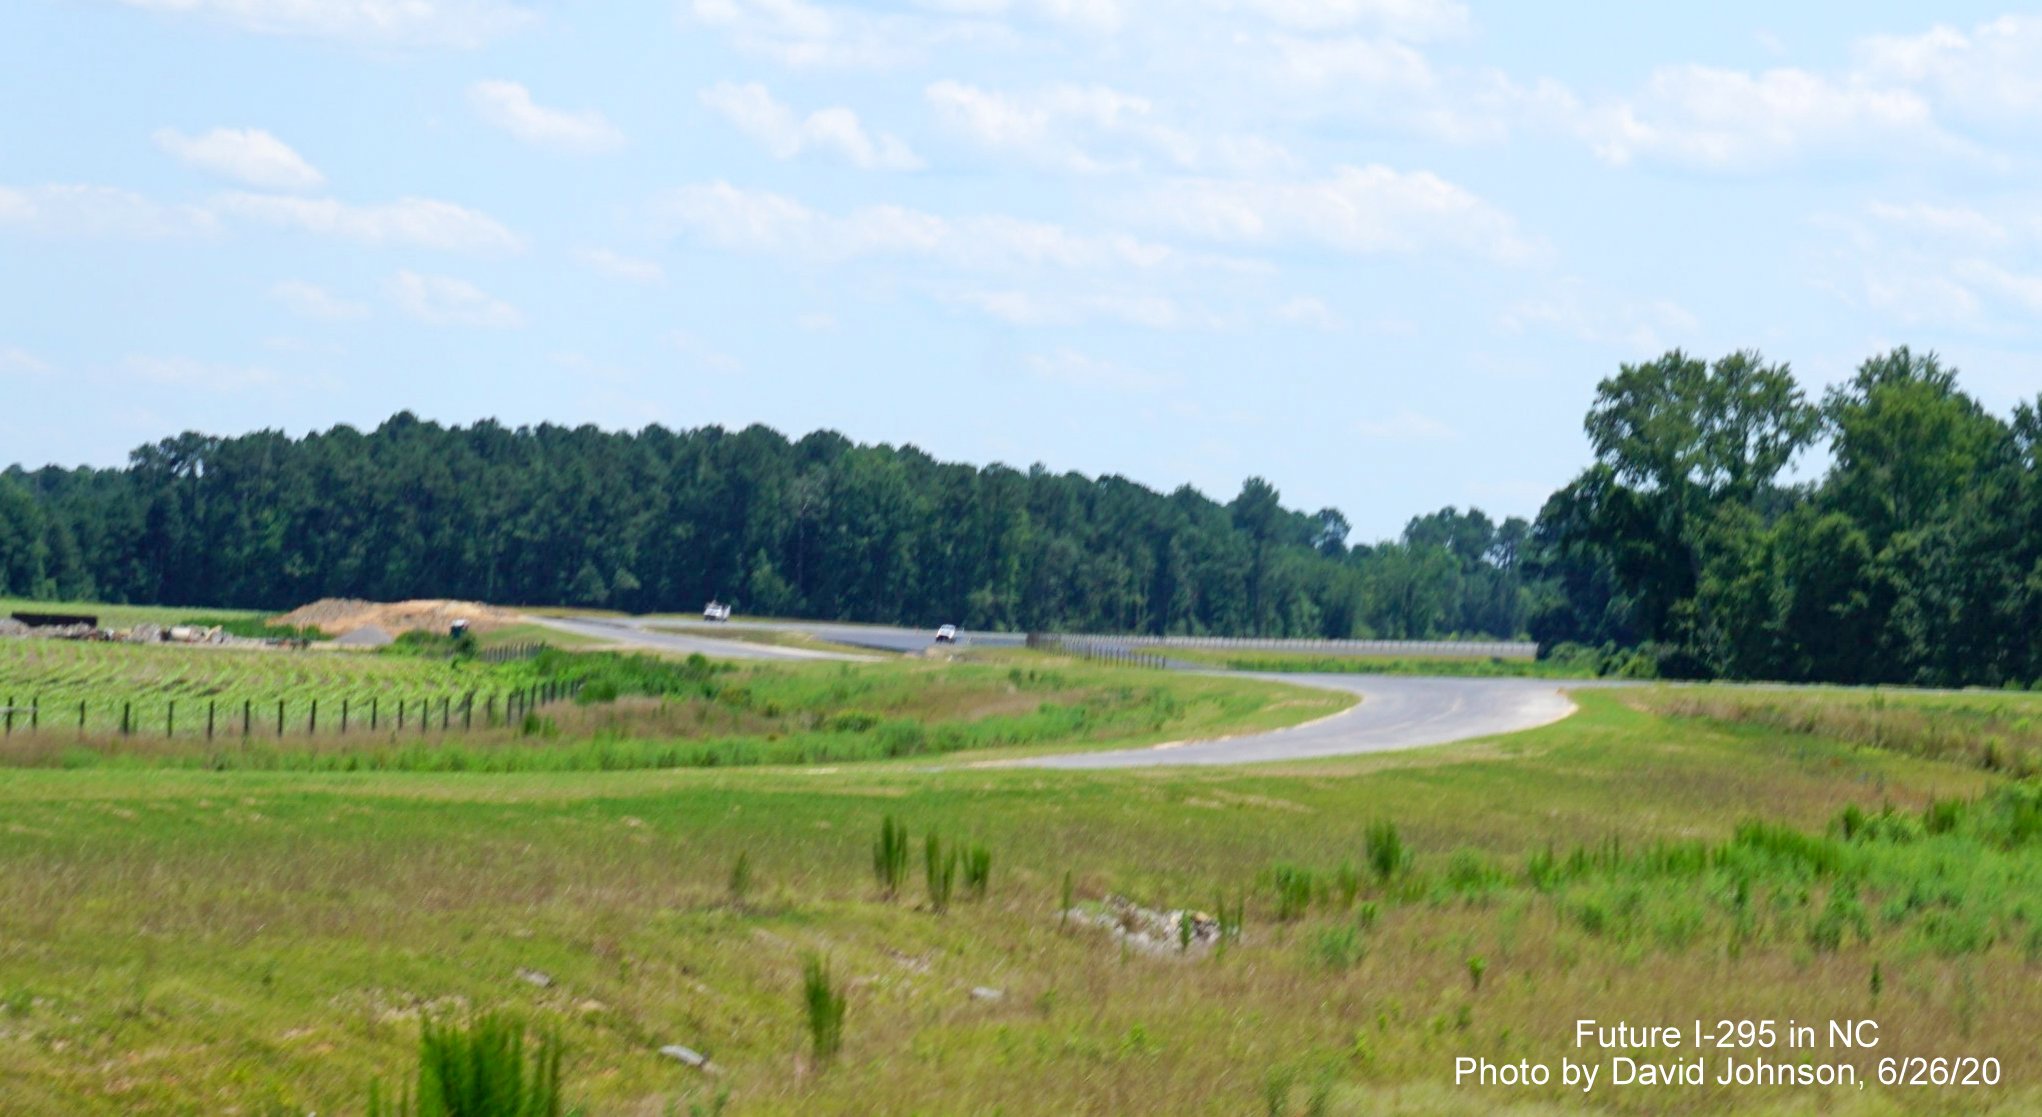 Image of future I-295 South ramp nearly completed to Cliffdale Road, by David Johnson, June 2020